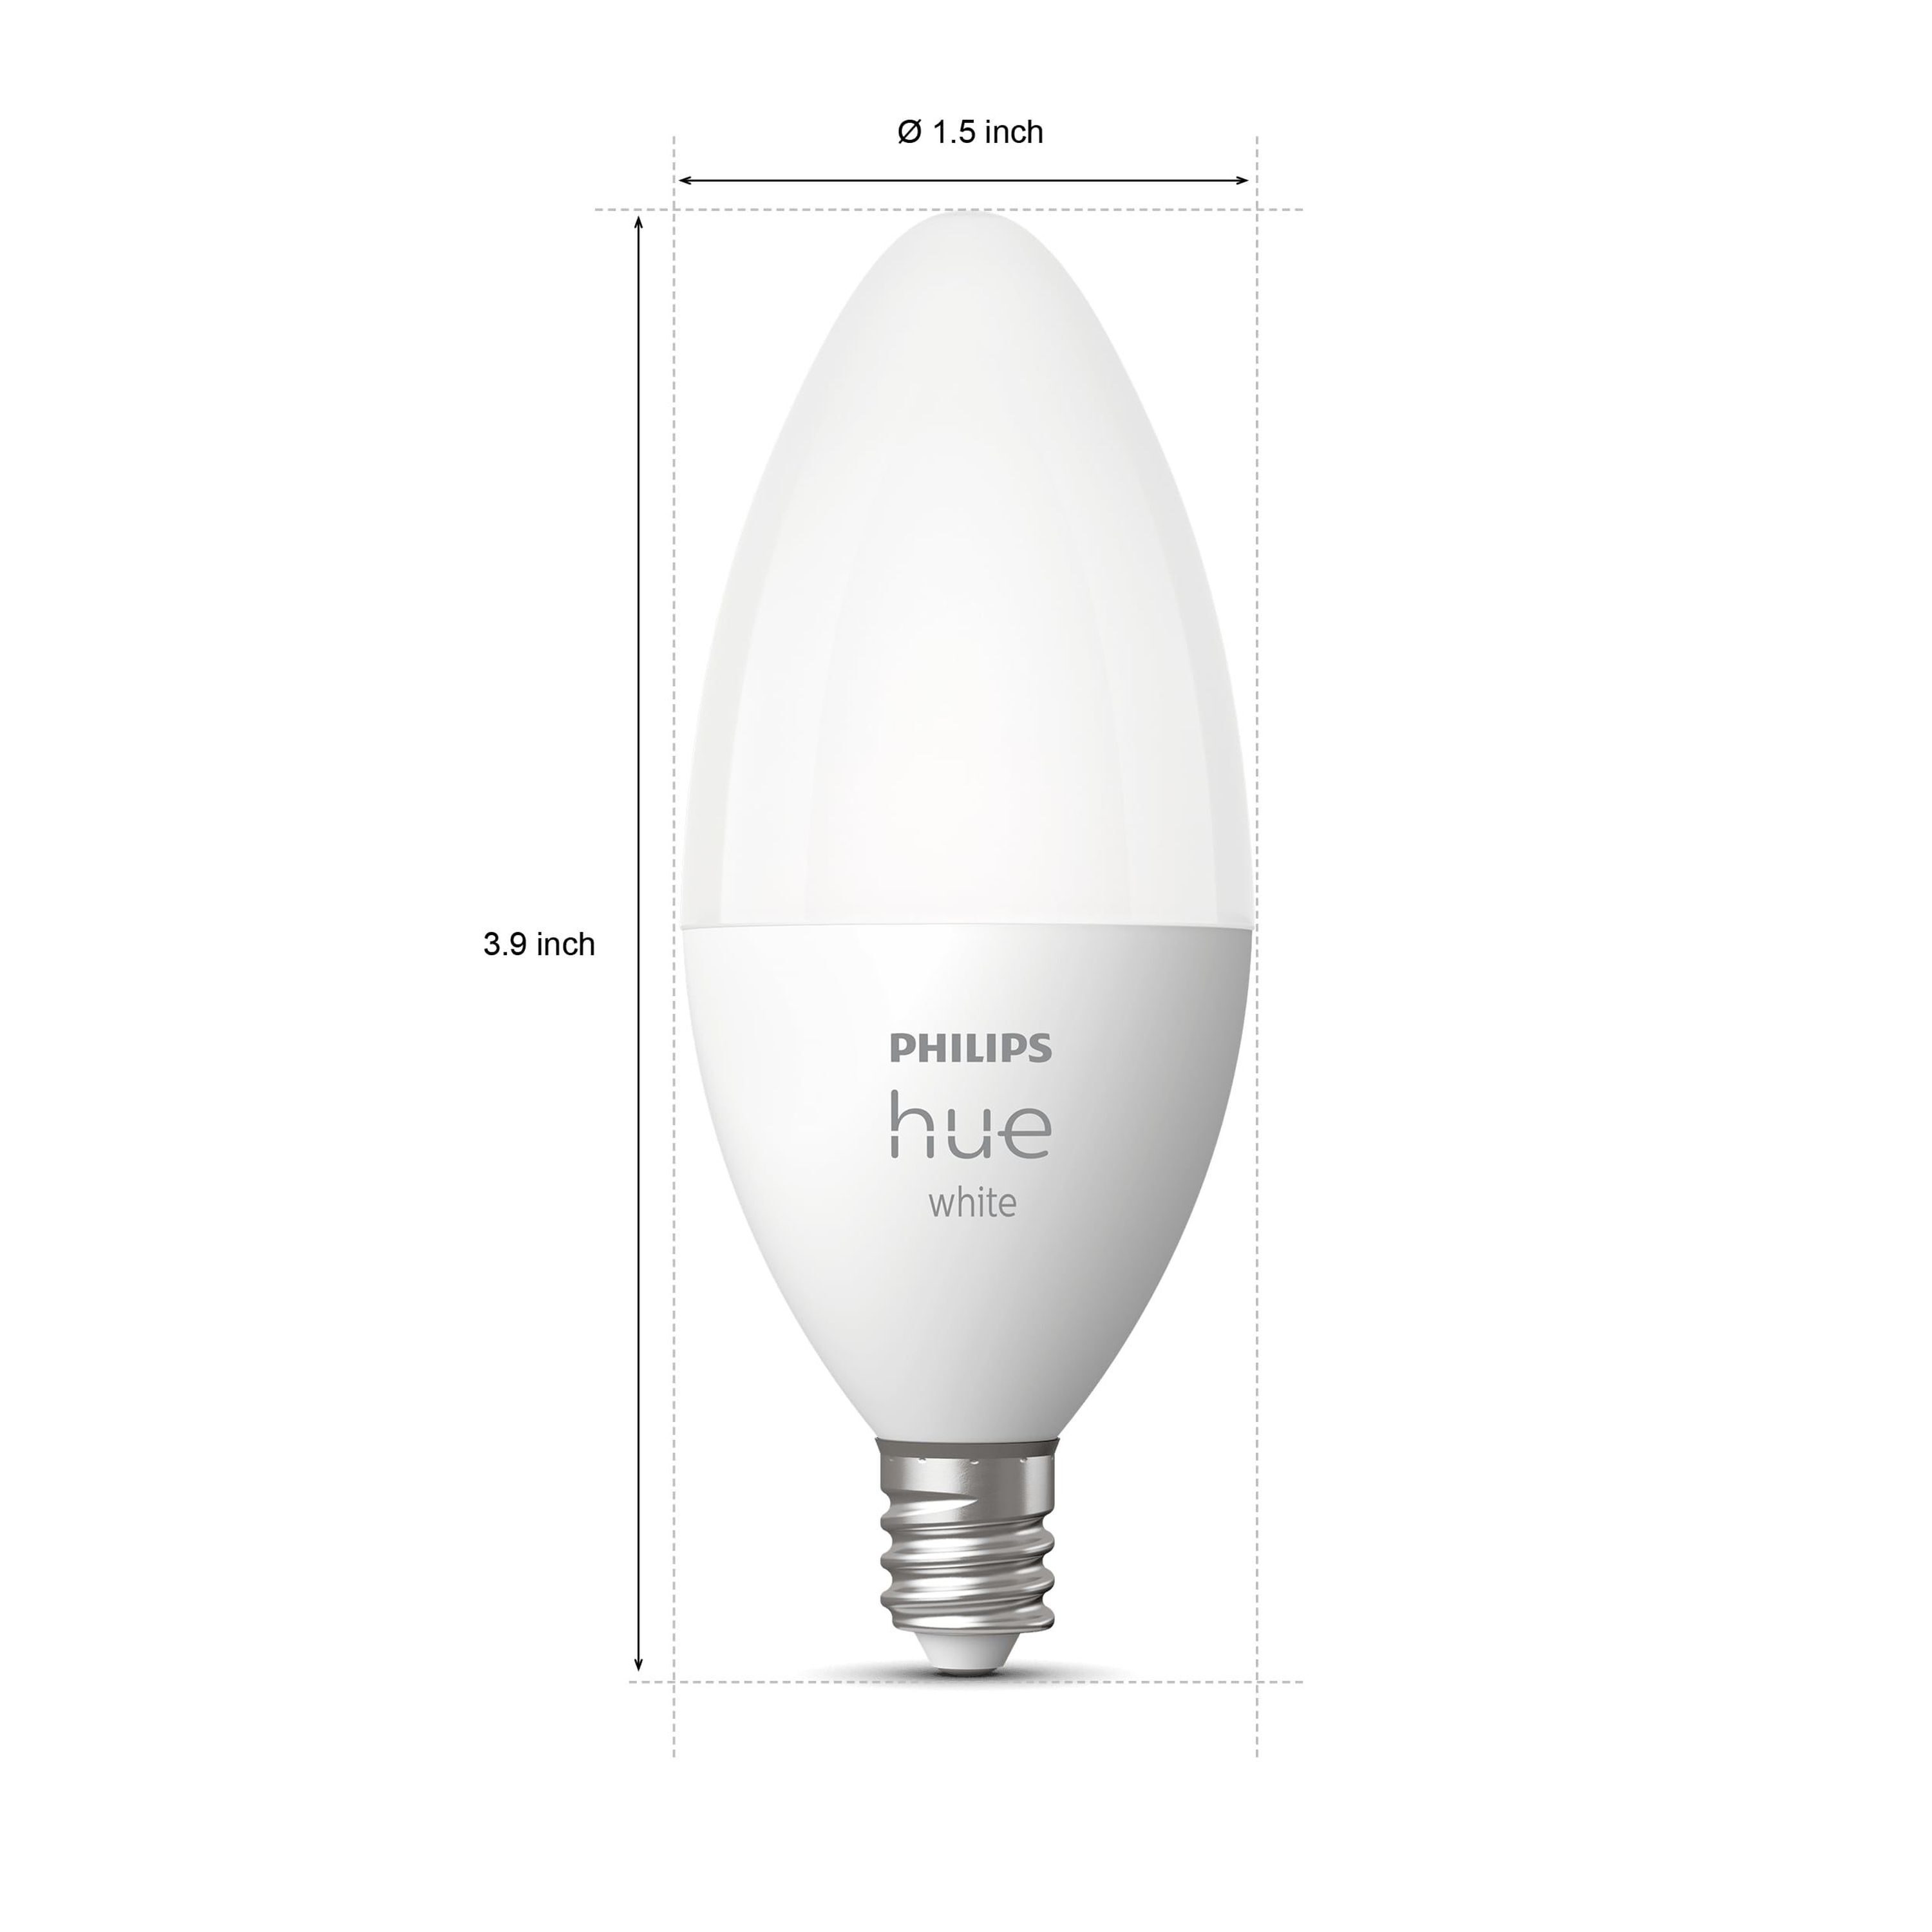 Philips Hue White&Color Amb. 5,1W Luster Crown 2 pack. E14